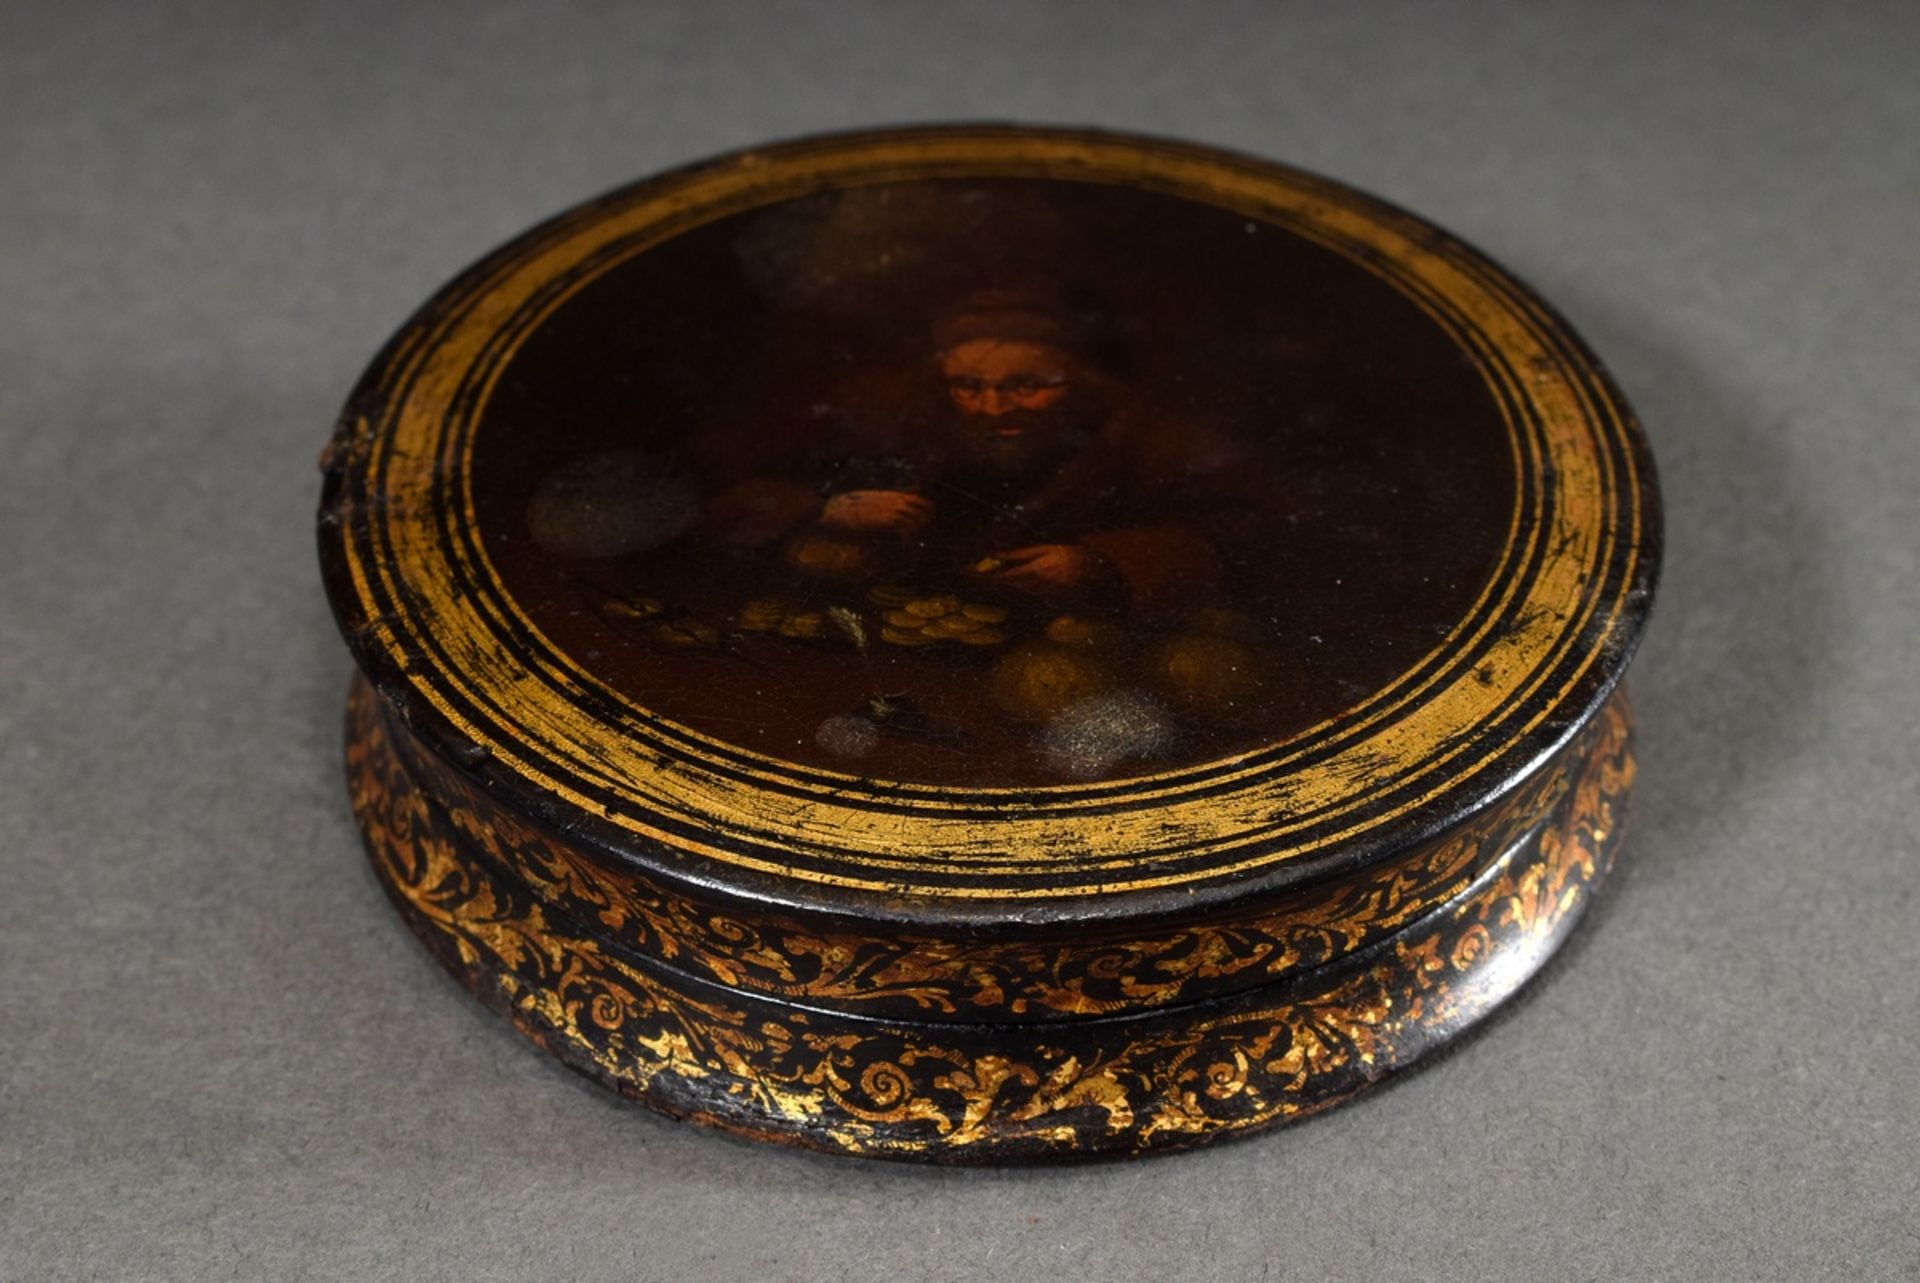 Round lacquer box with fine painting "money counter" on the lid and gold staffage, probably Stobwas - Image 2 of 4